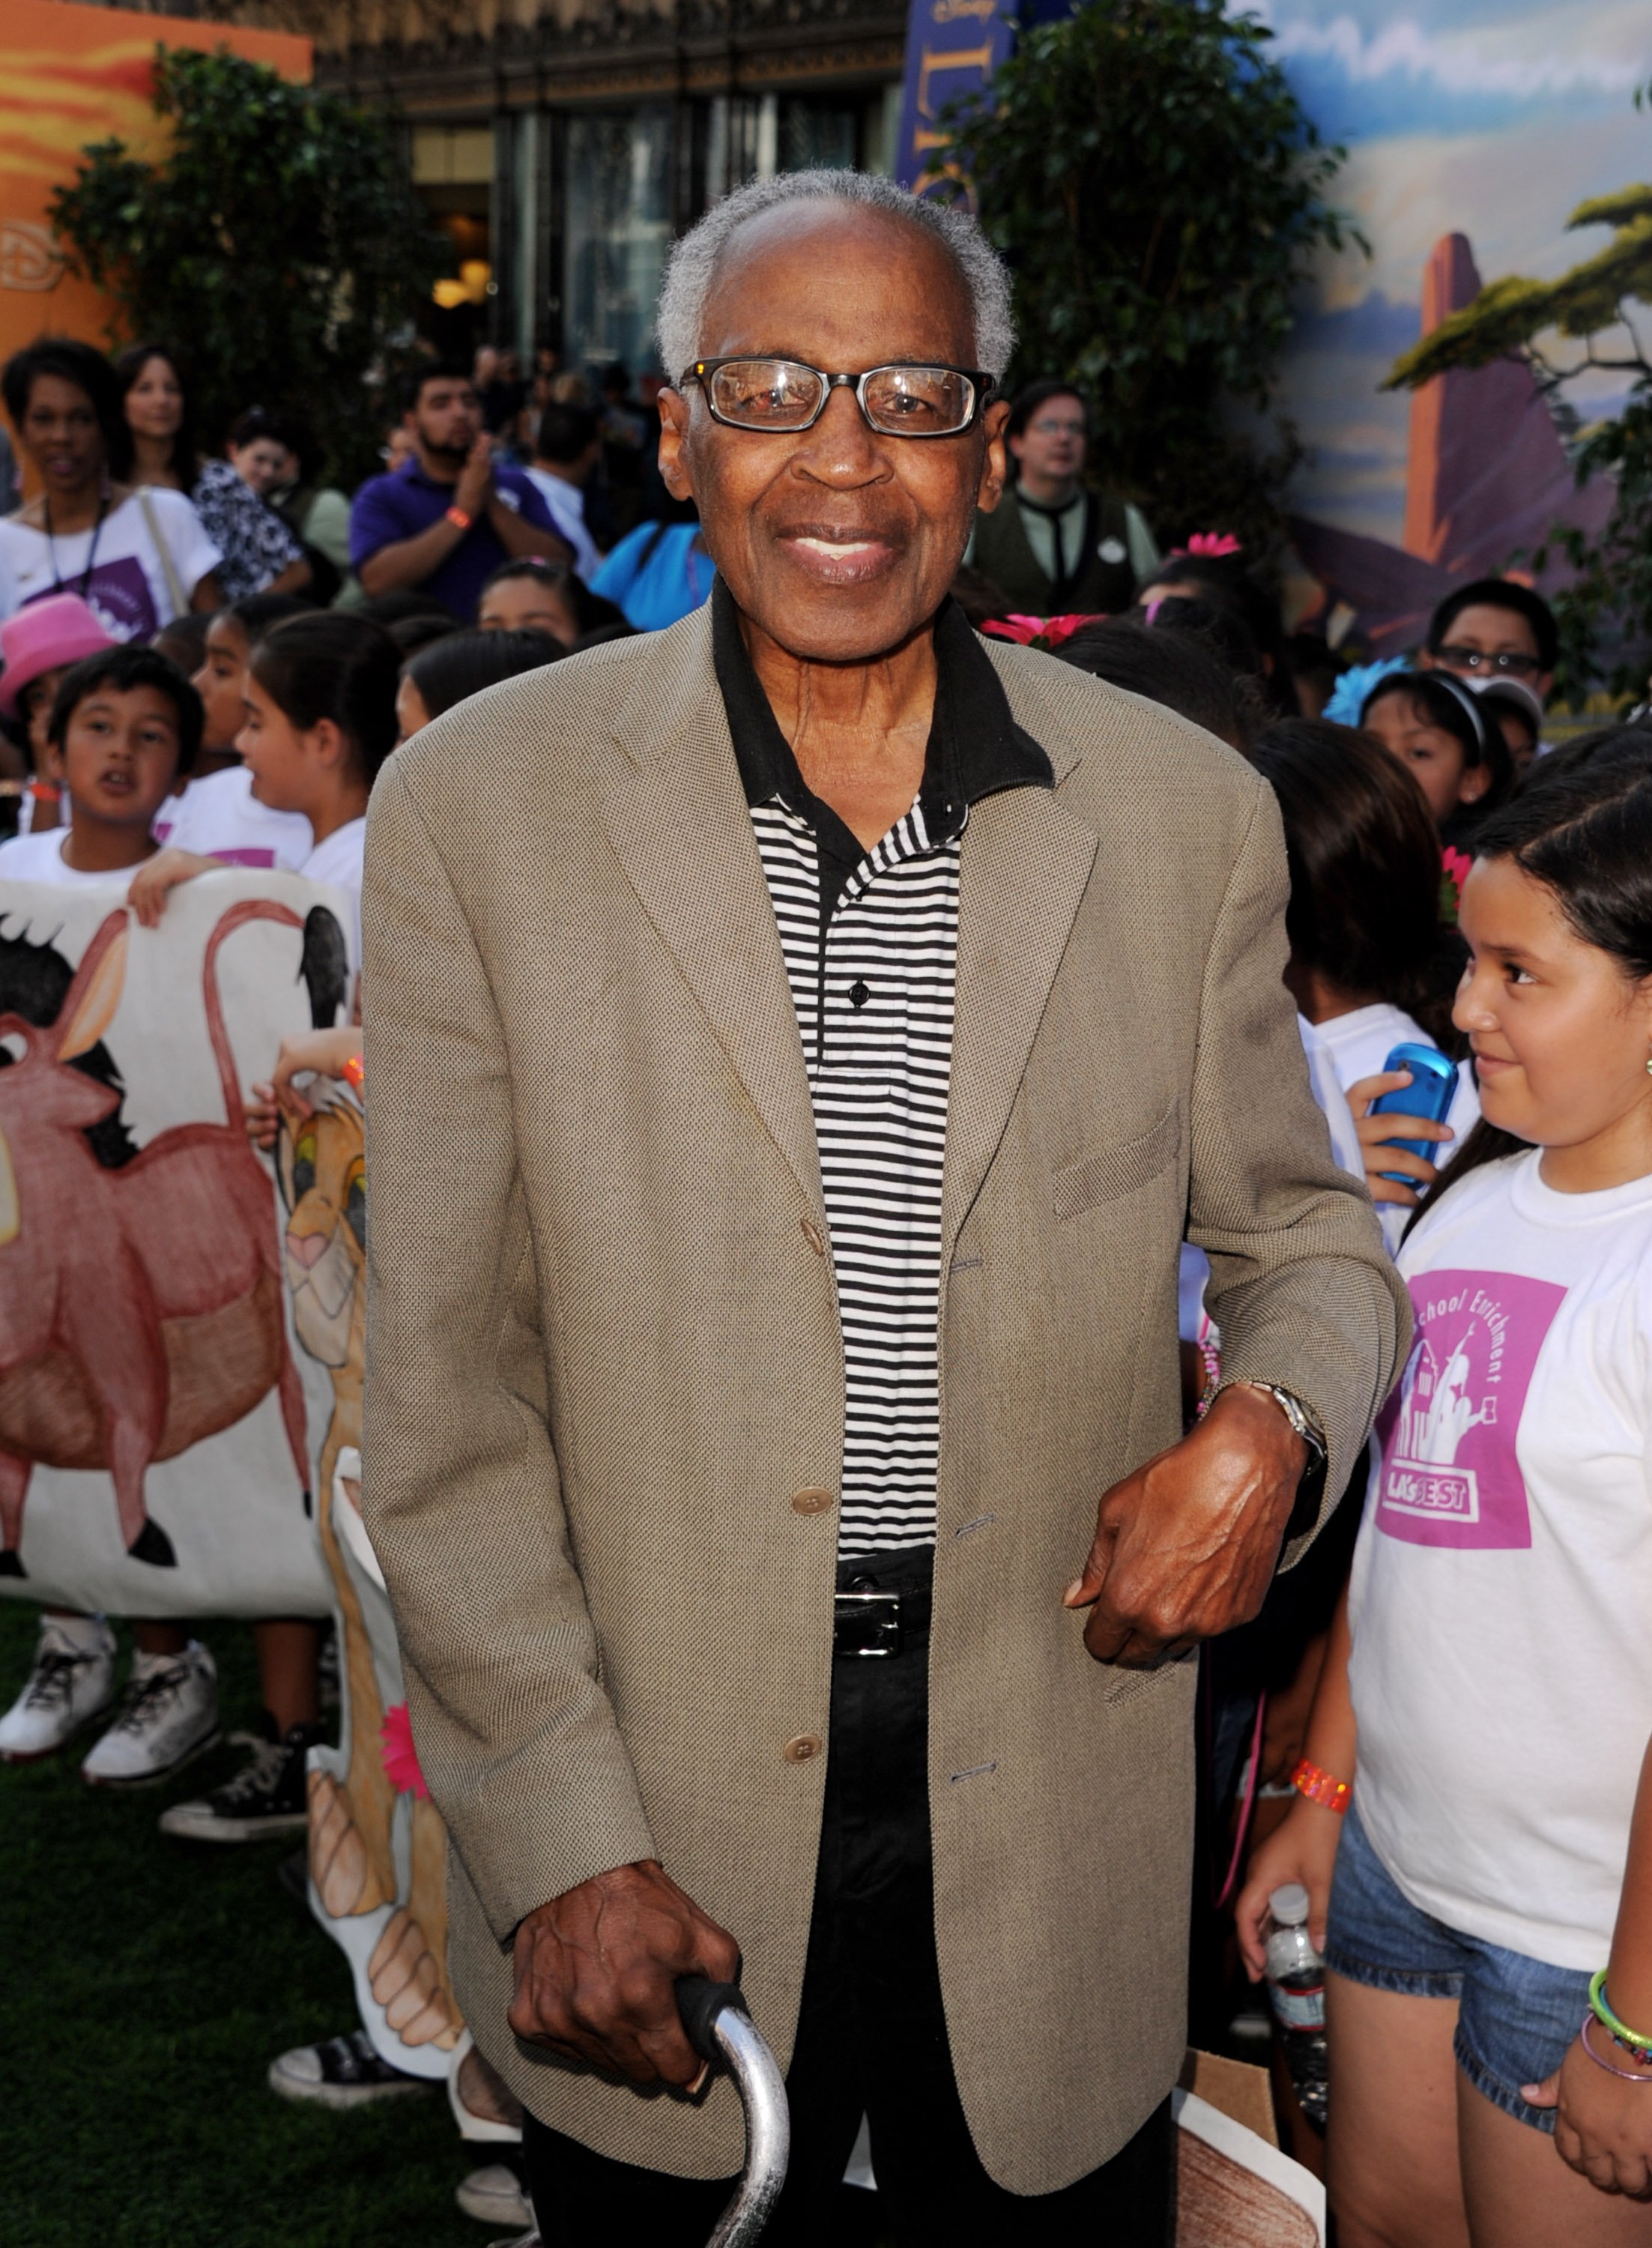 Actor Robert Guillaume arrives at the premiere of Walt Disney Studios' "The Lion King 3D" at the El Capitan Theater | Source: Getty Images